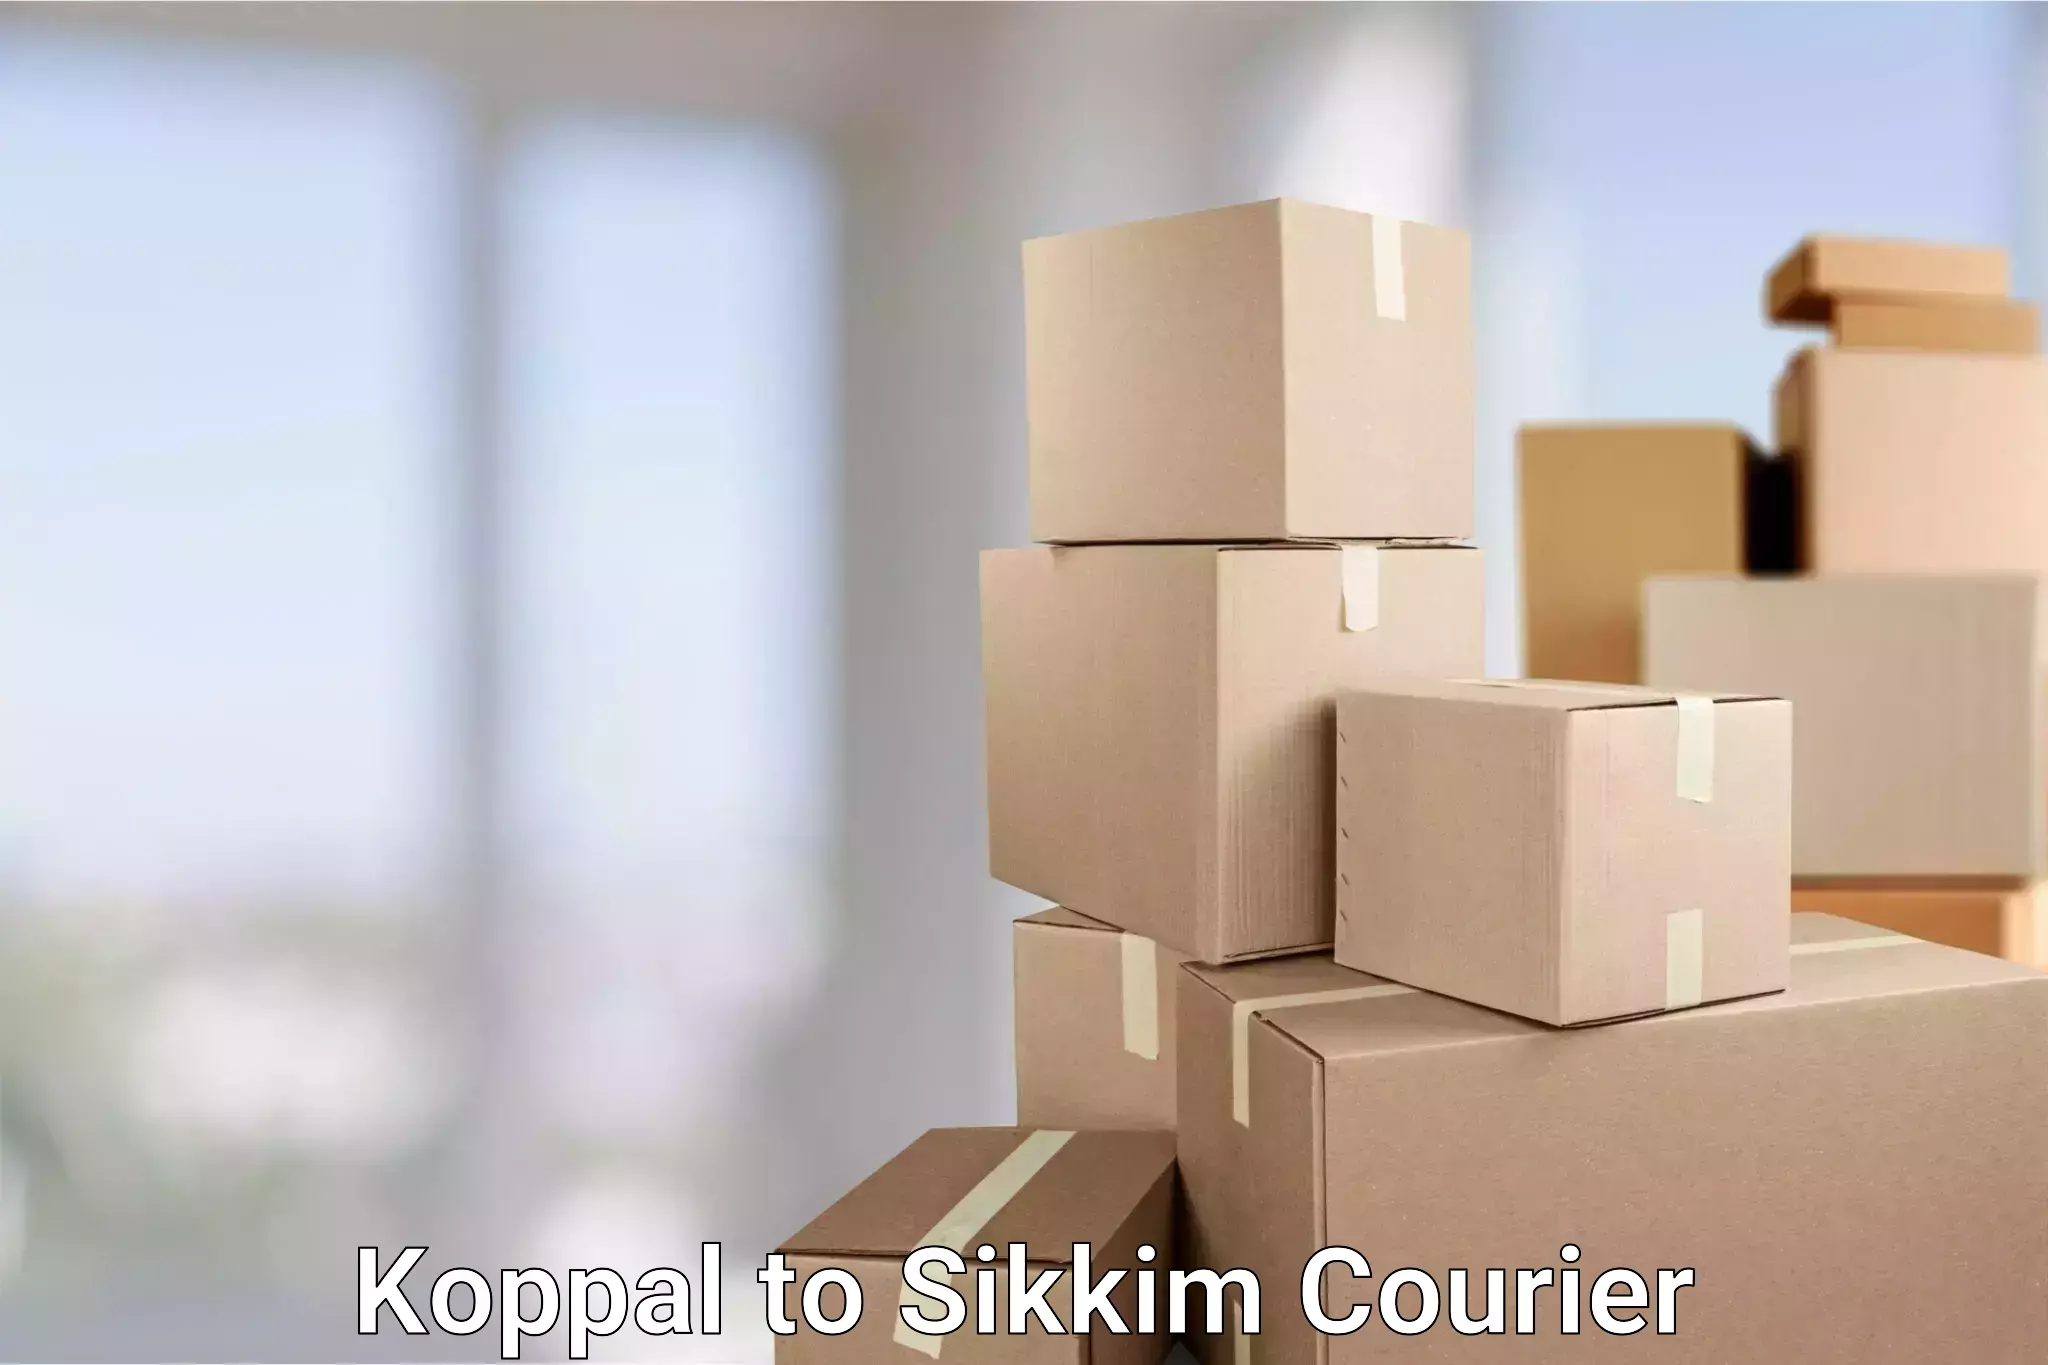 User-friendly delivery service Koppal to Sikkim